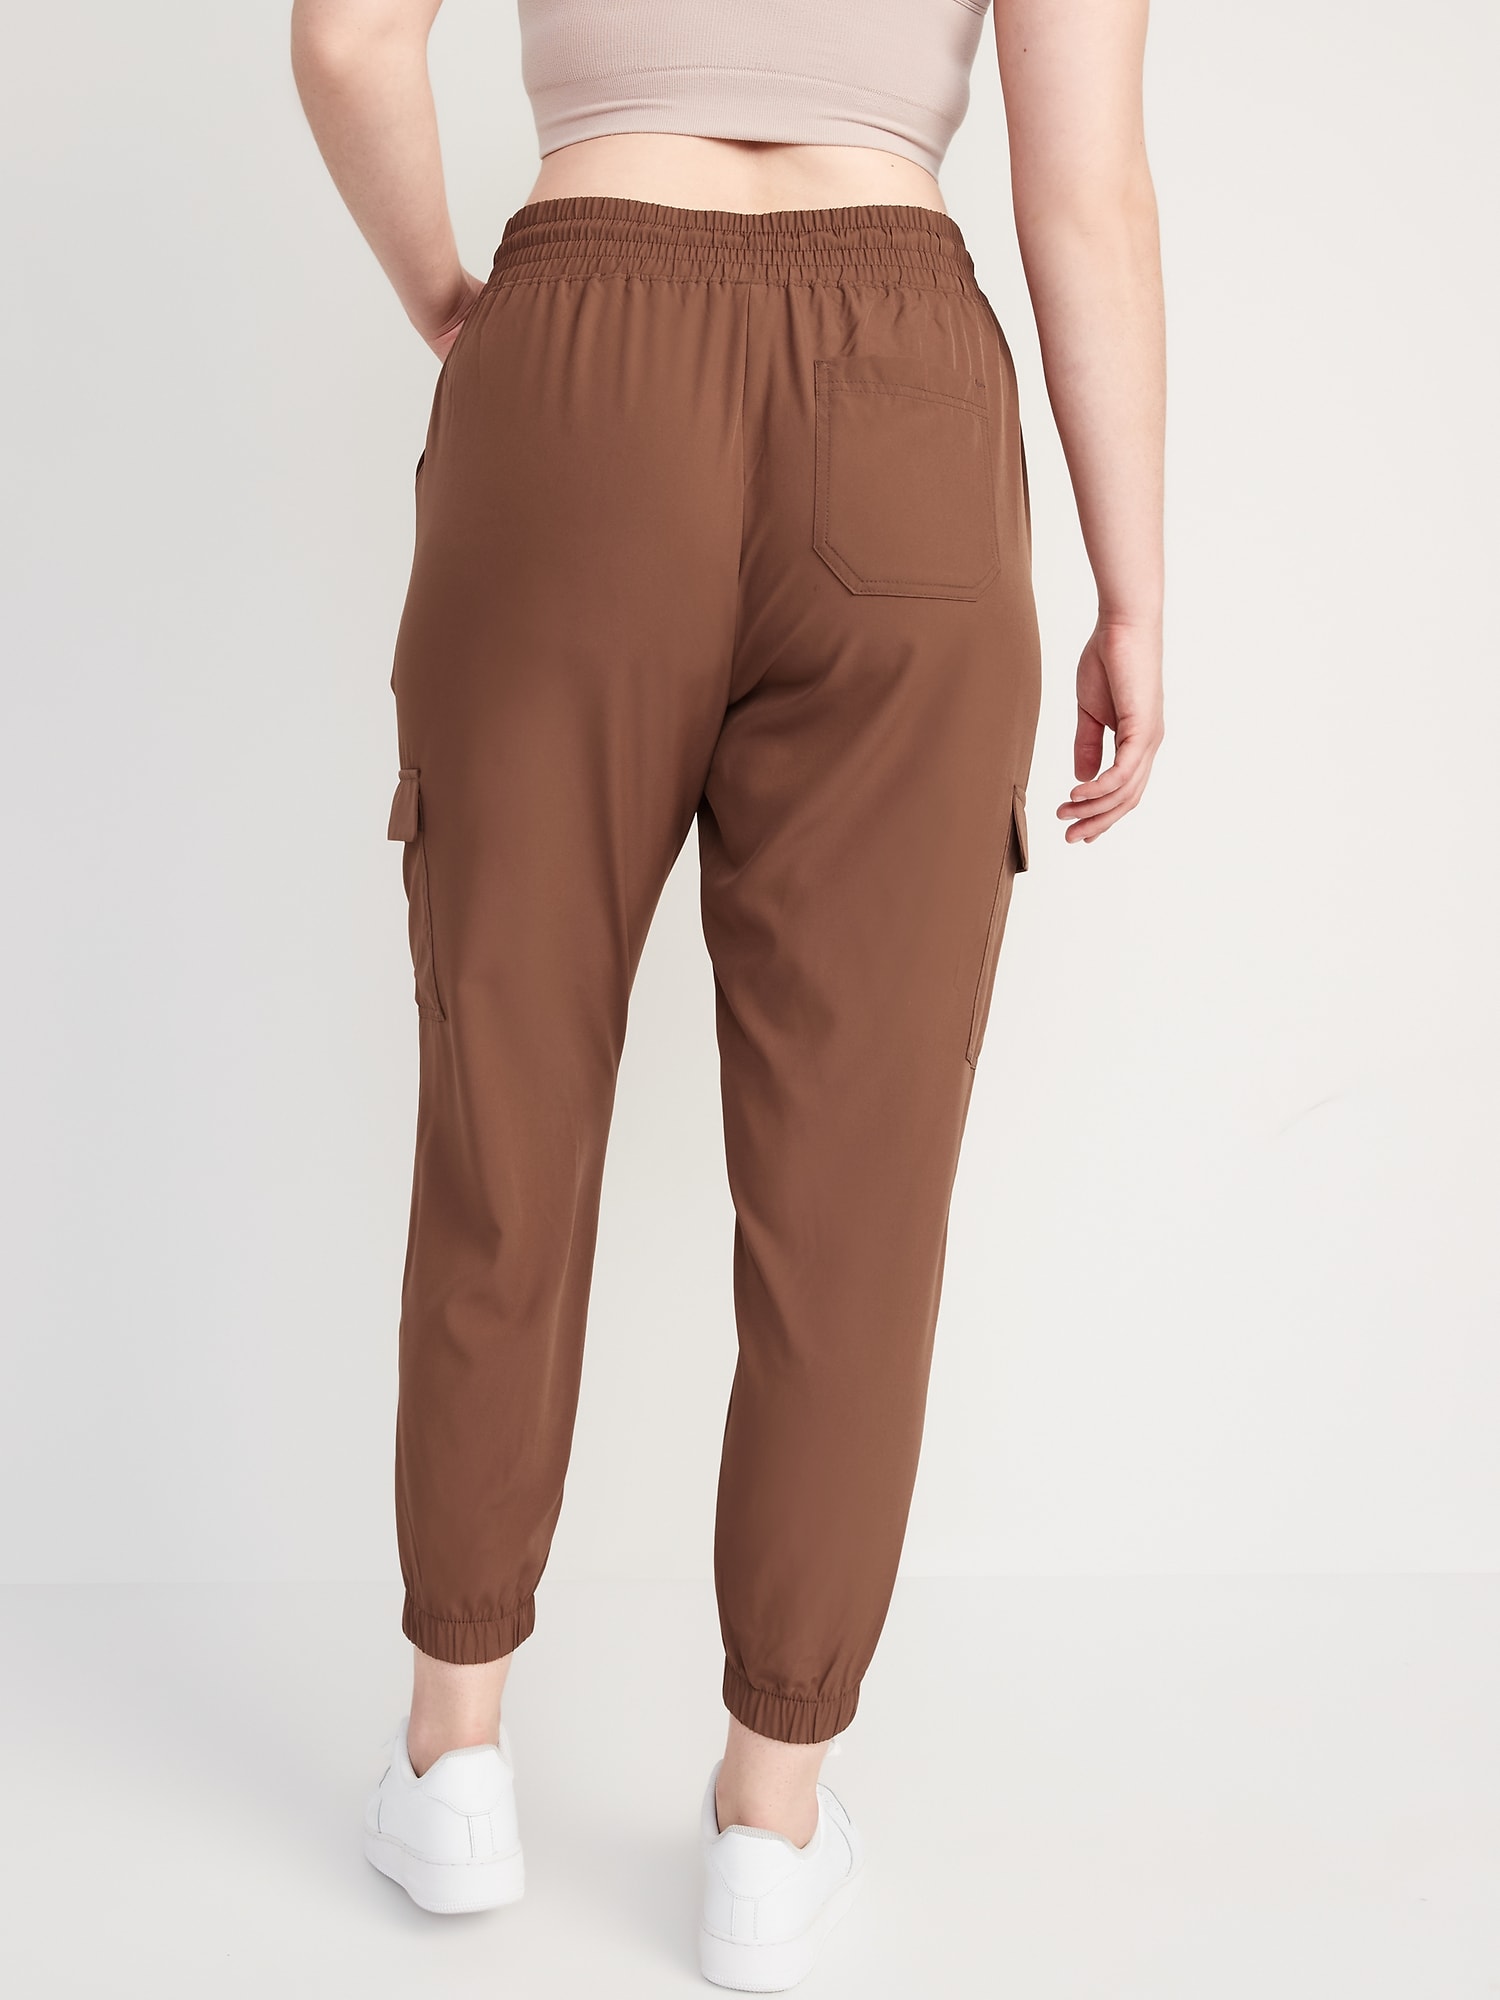 MidRise StretchTech Jogger Pants for Women  Old Navy